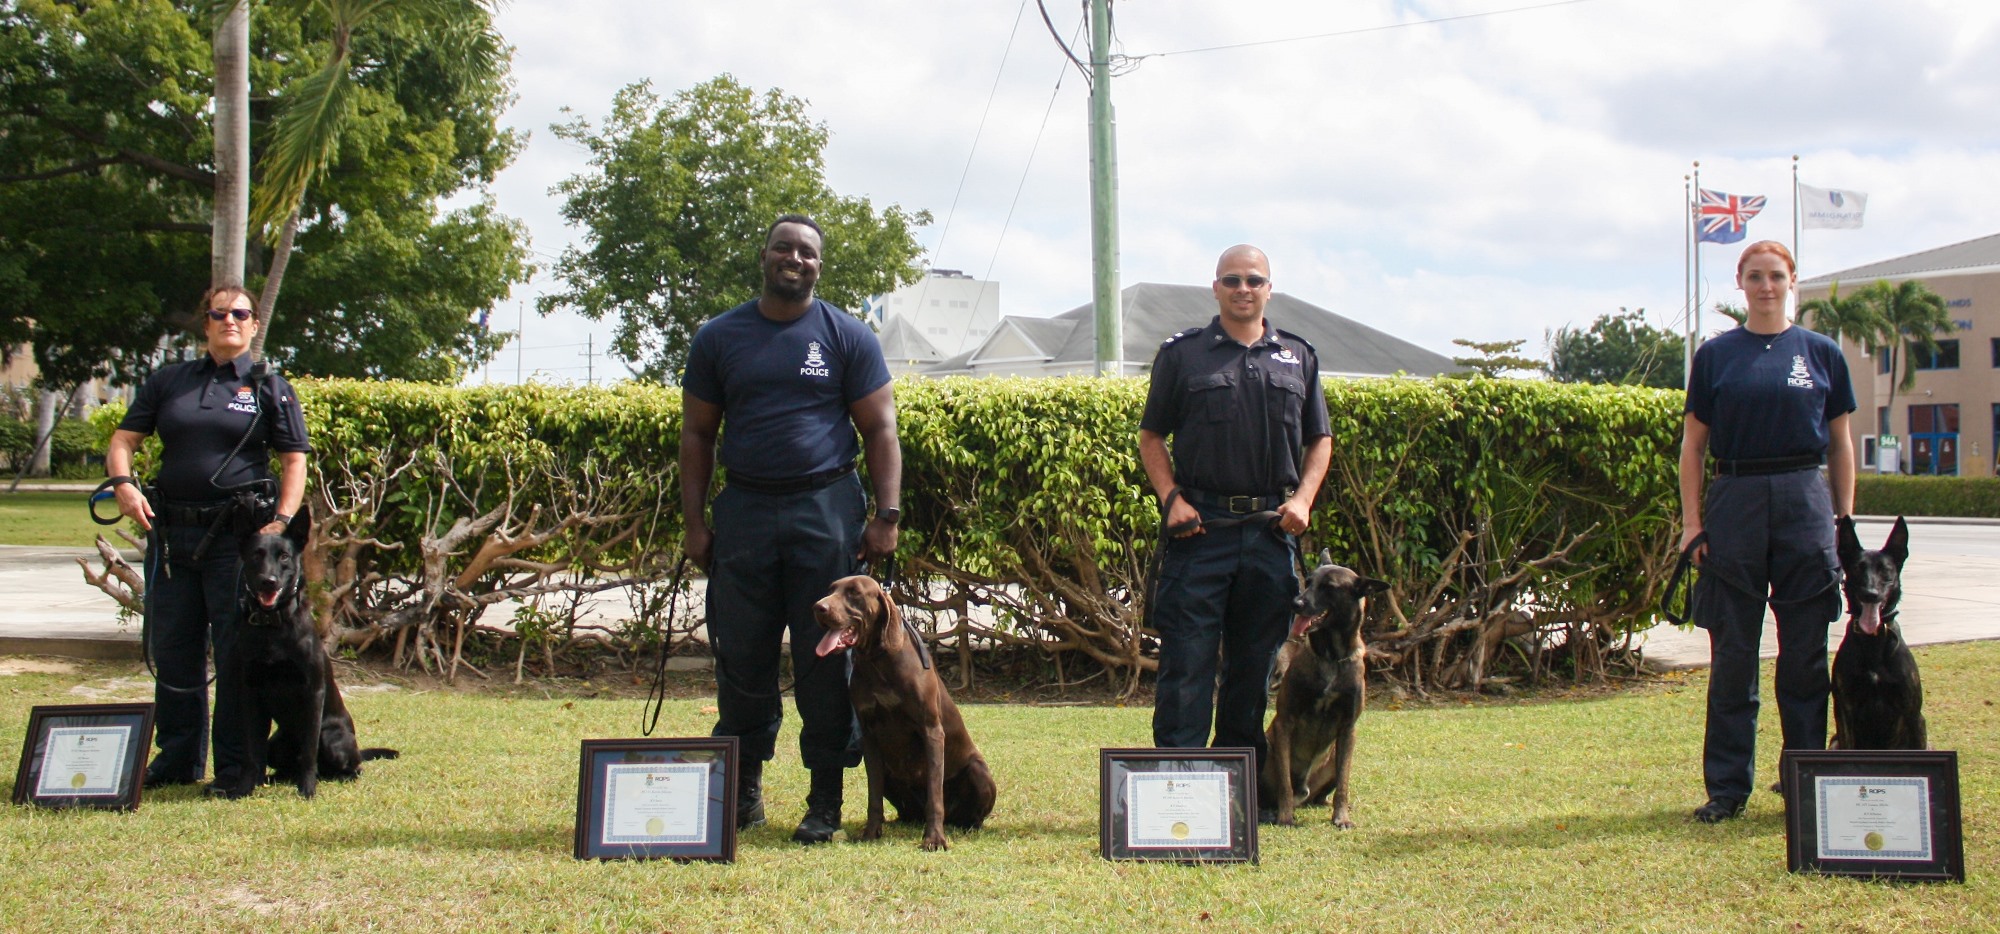 The K-9 officers pose with their dogs.